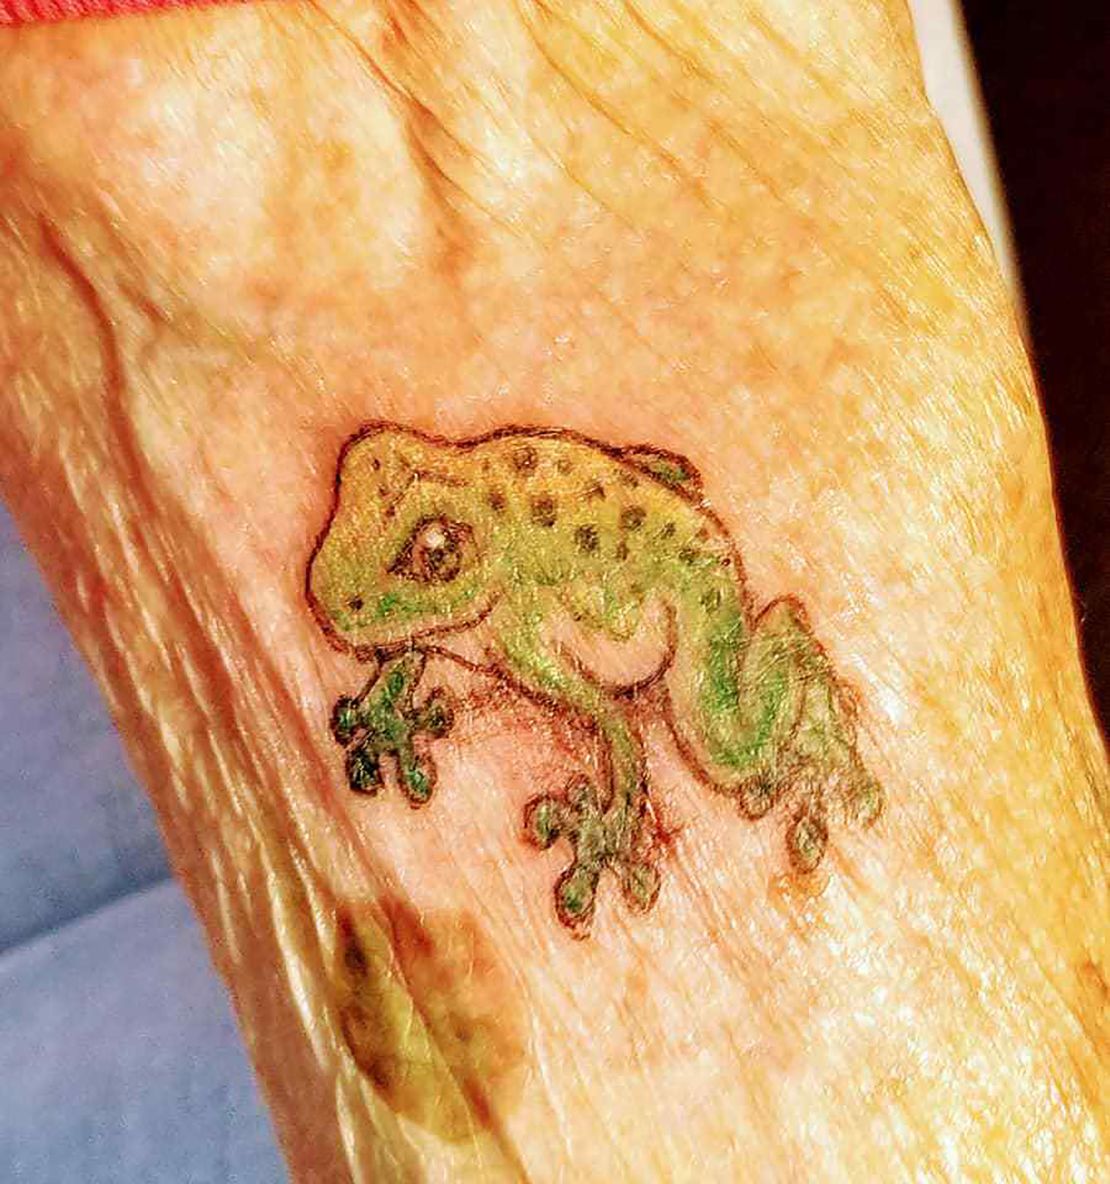 Pollack's new frog tattoo.